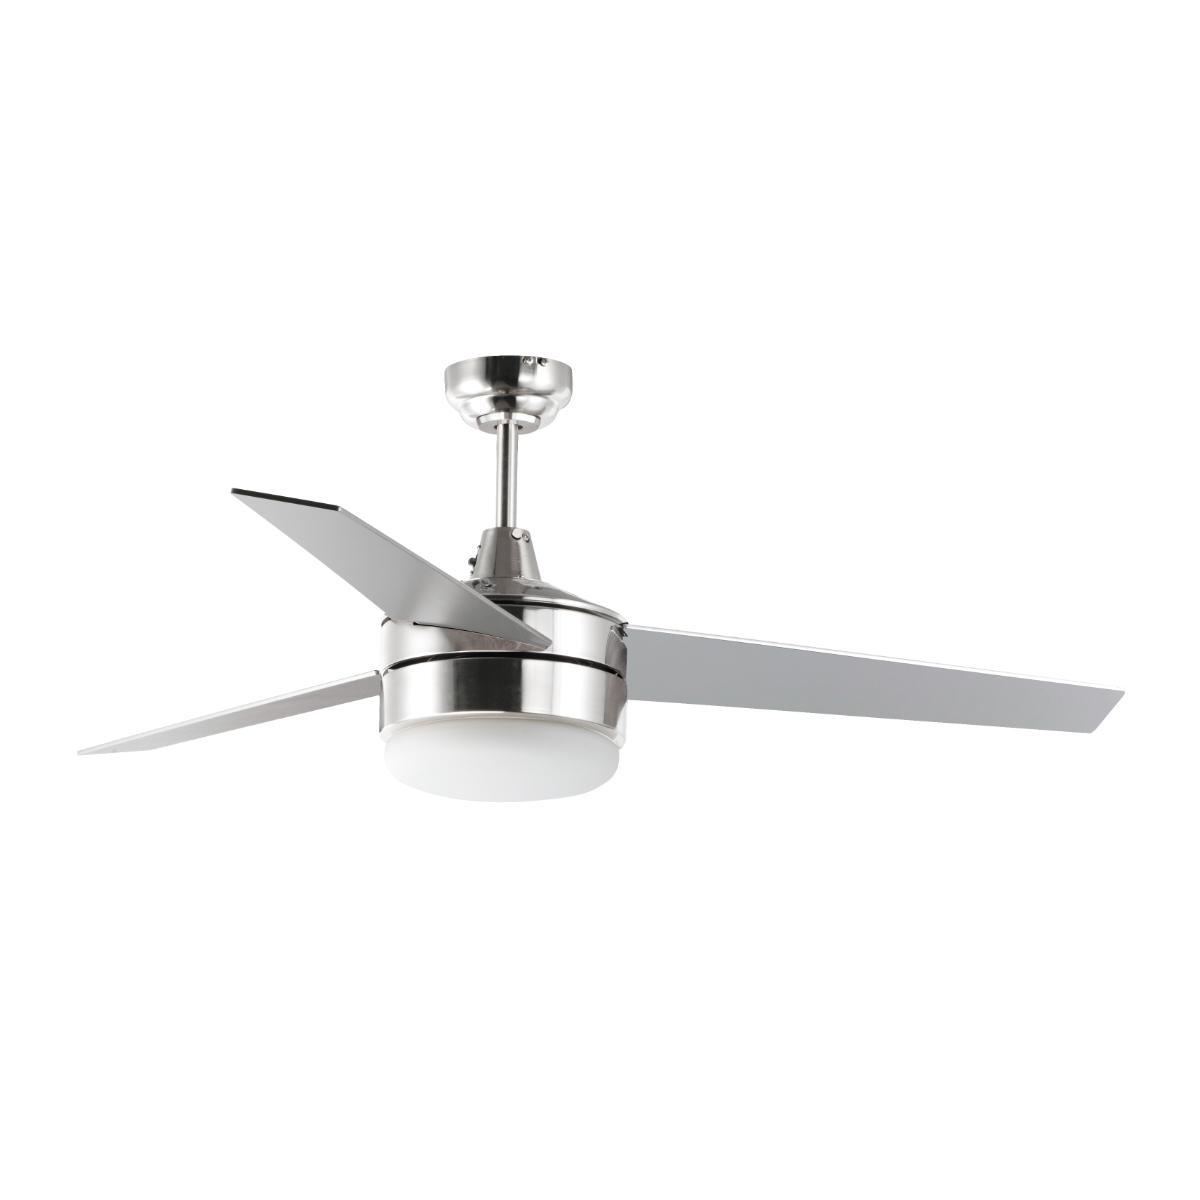 Trio 52 Inch LED 2-Light Ceiling Fan With Wall Control